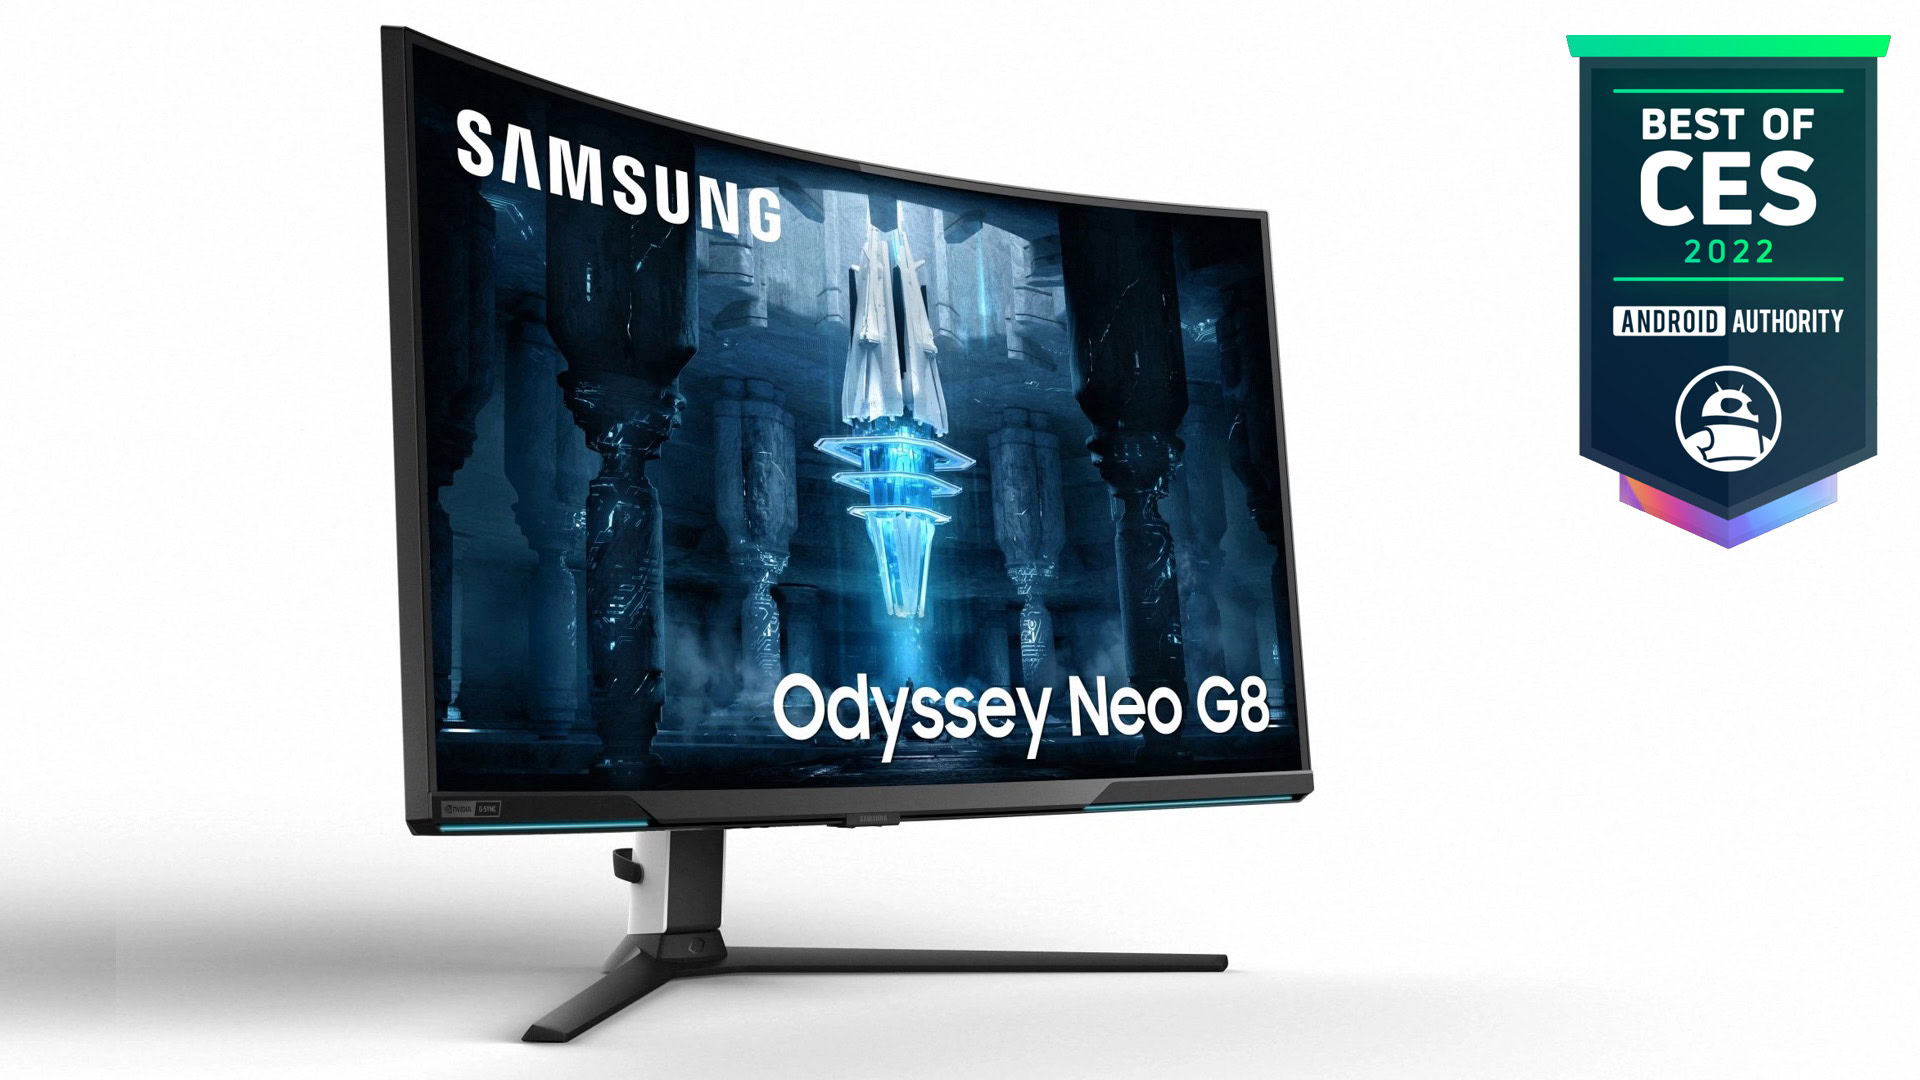 Samsung Odyssey Neo G8 Android Authority Best of CES 2022 Award winner